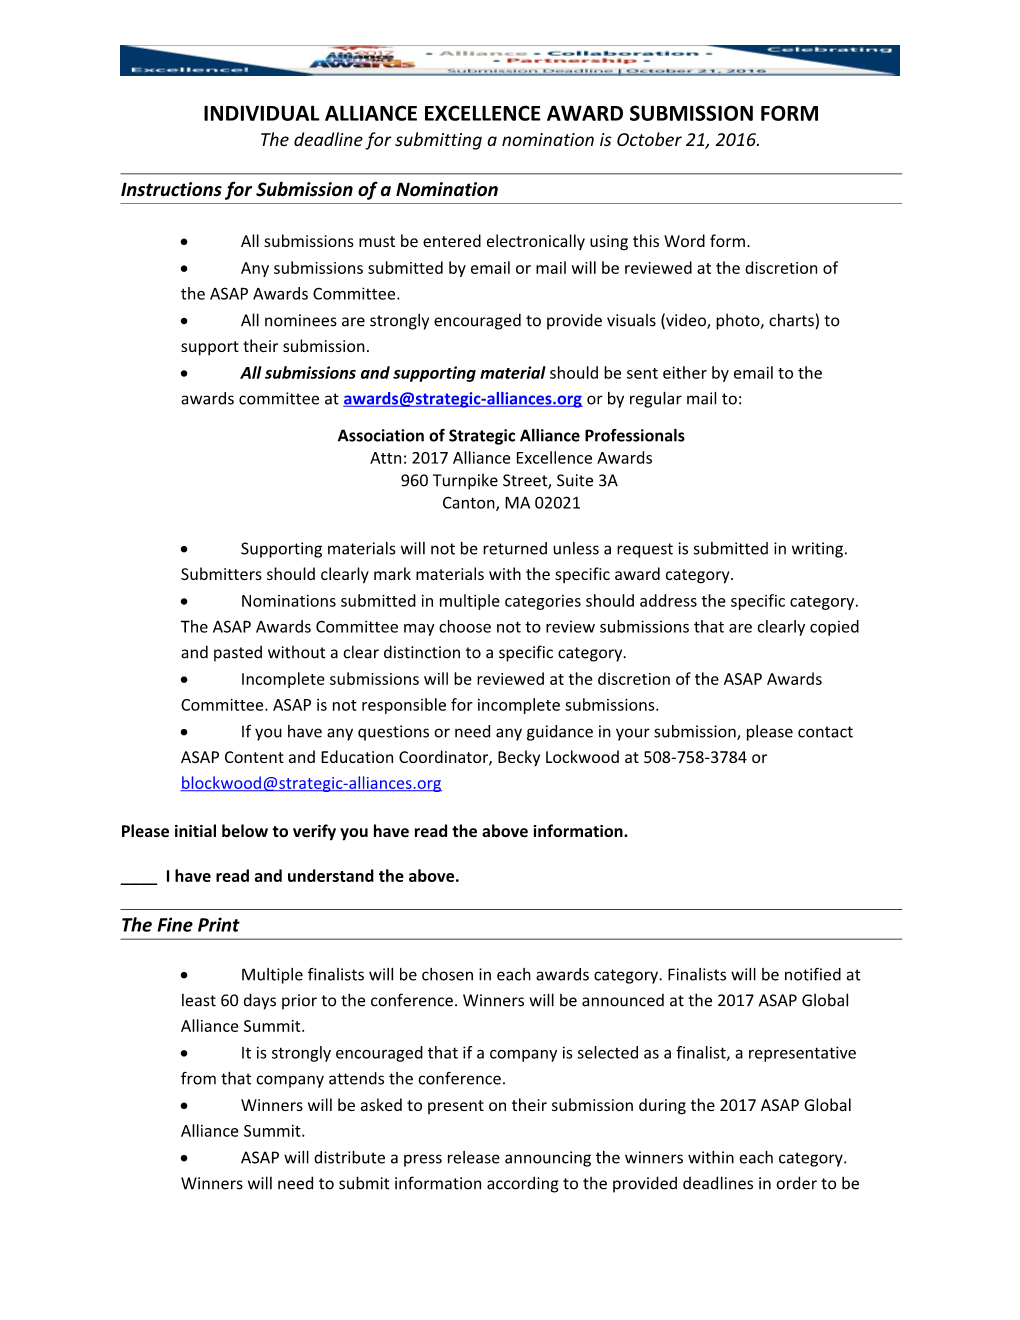 Individual Alliance Excellence Award Submission Form